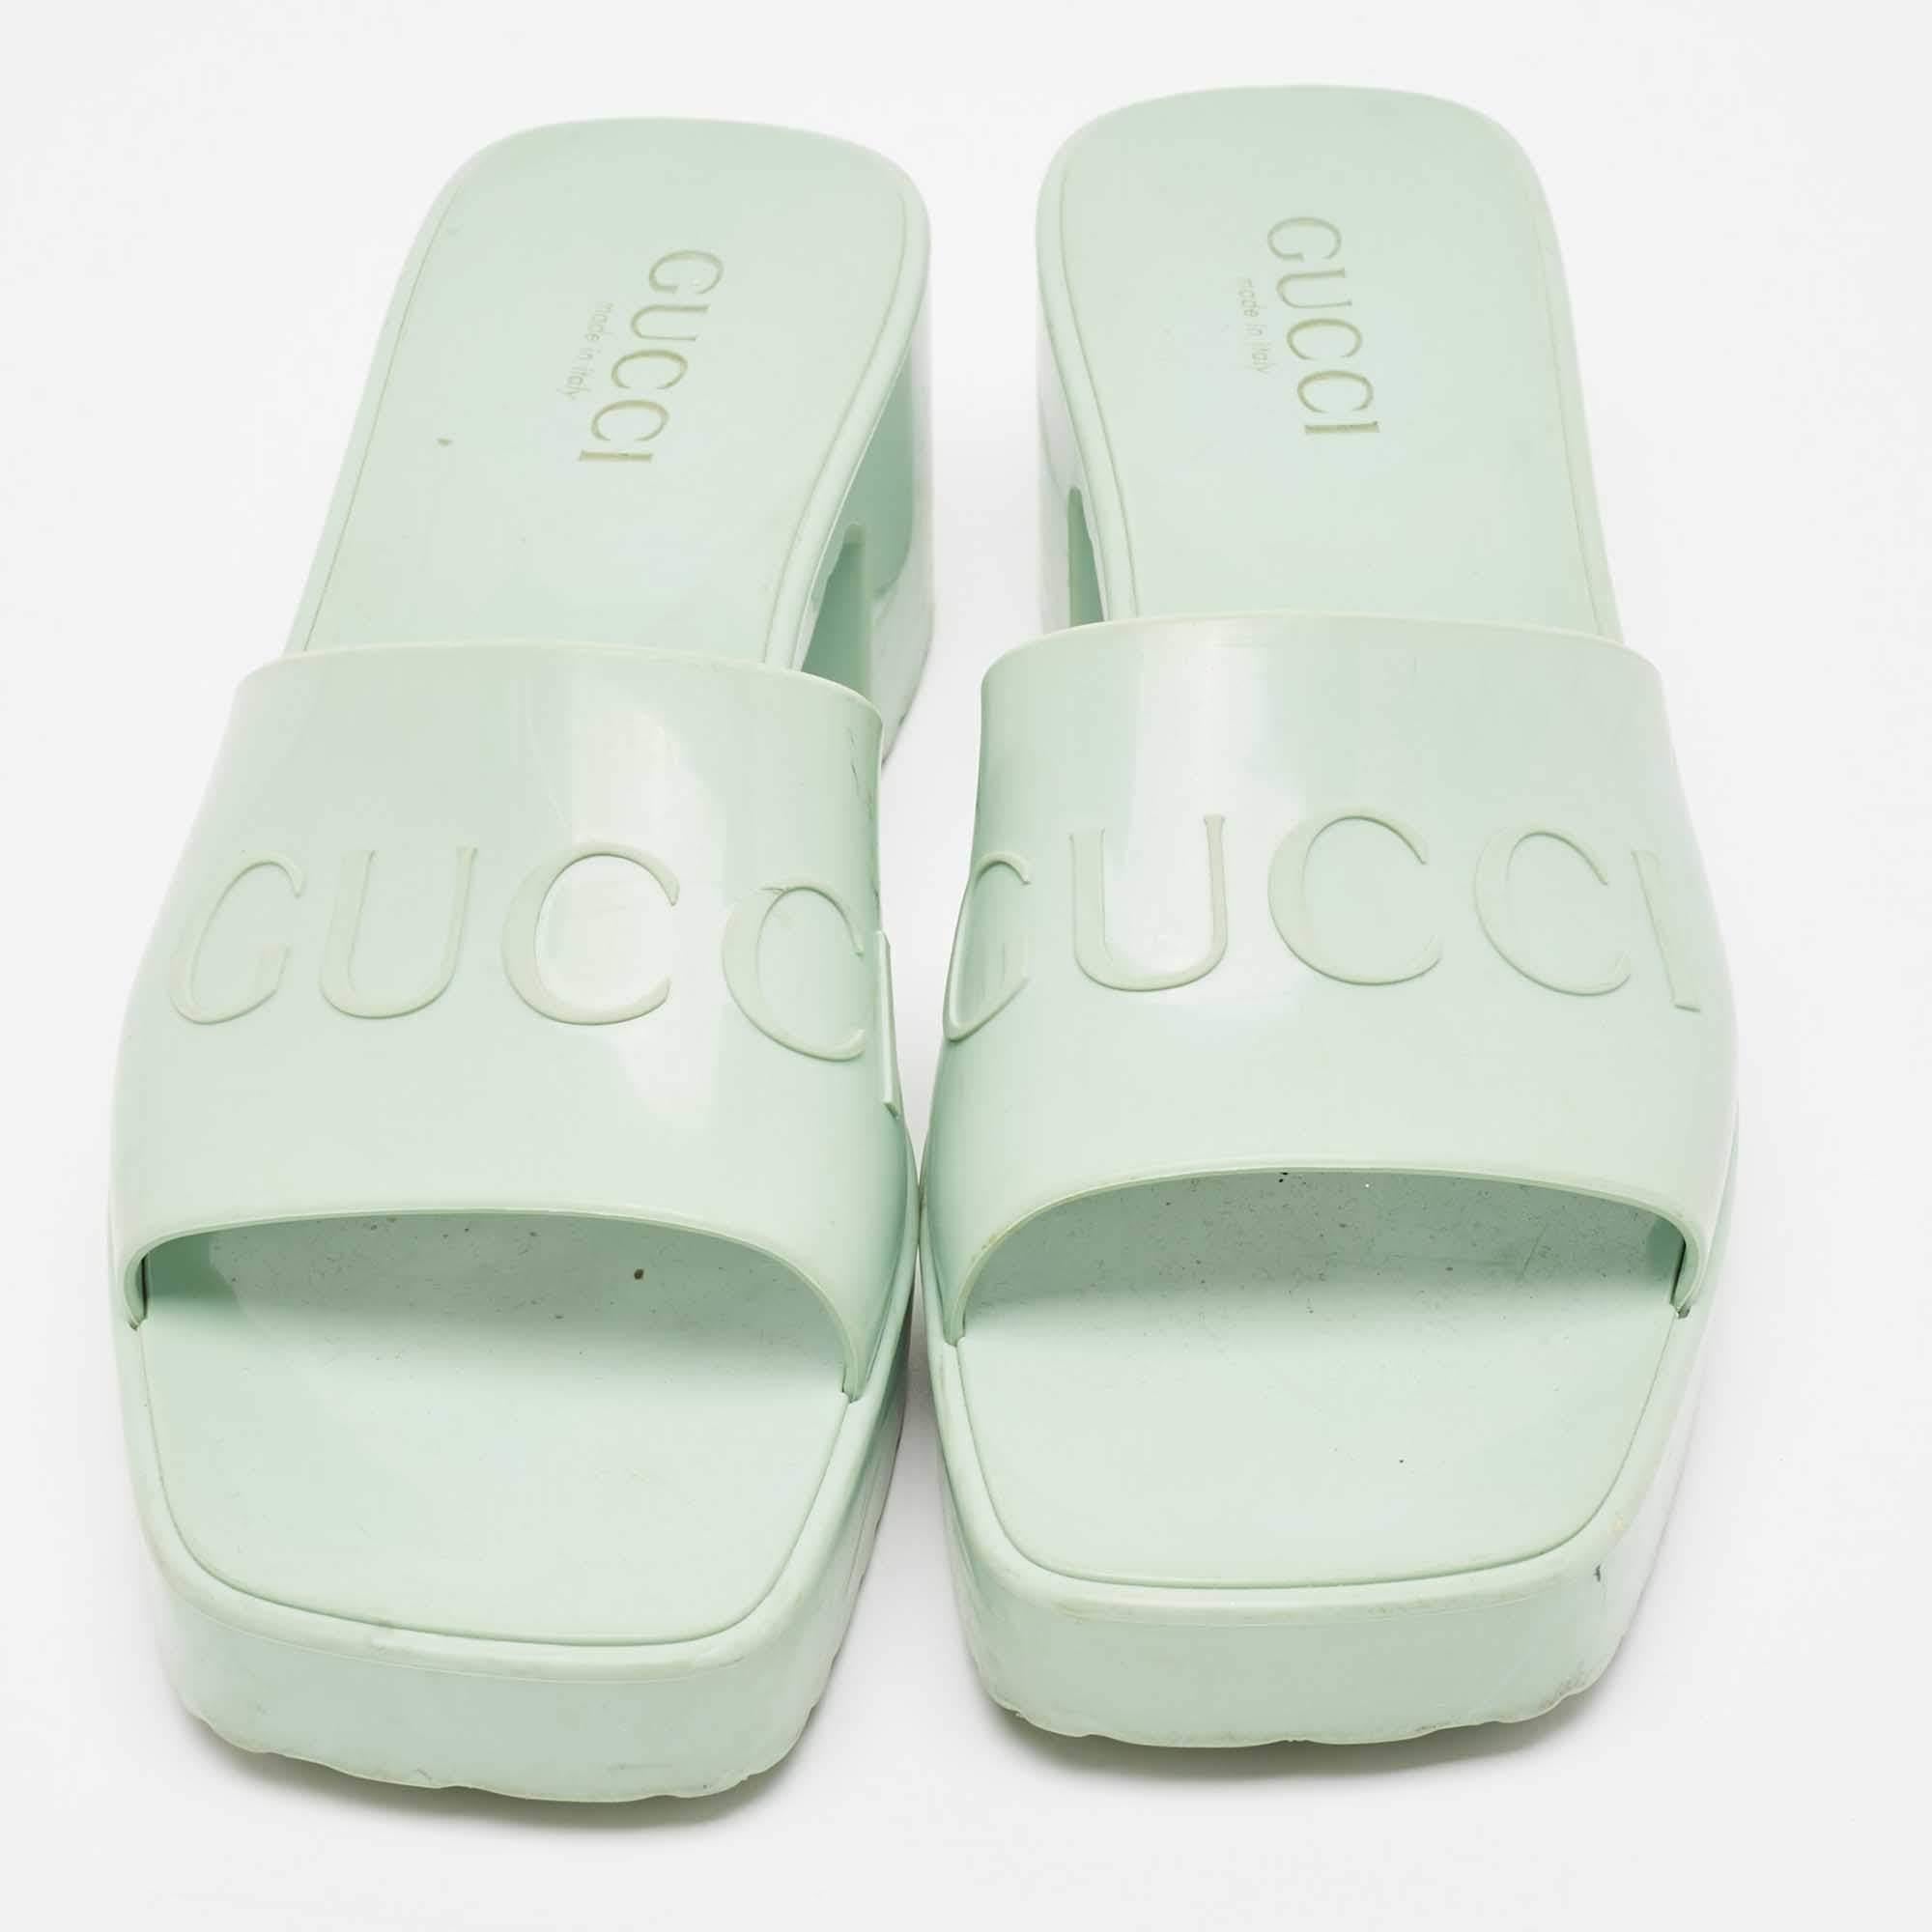 Complement your well-put-together outfit with these slide sandals by Gucci. Minimal and classy, they have an amazing construction for enduring quality and comfortable fit.

